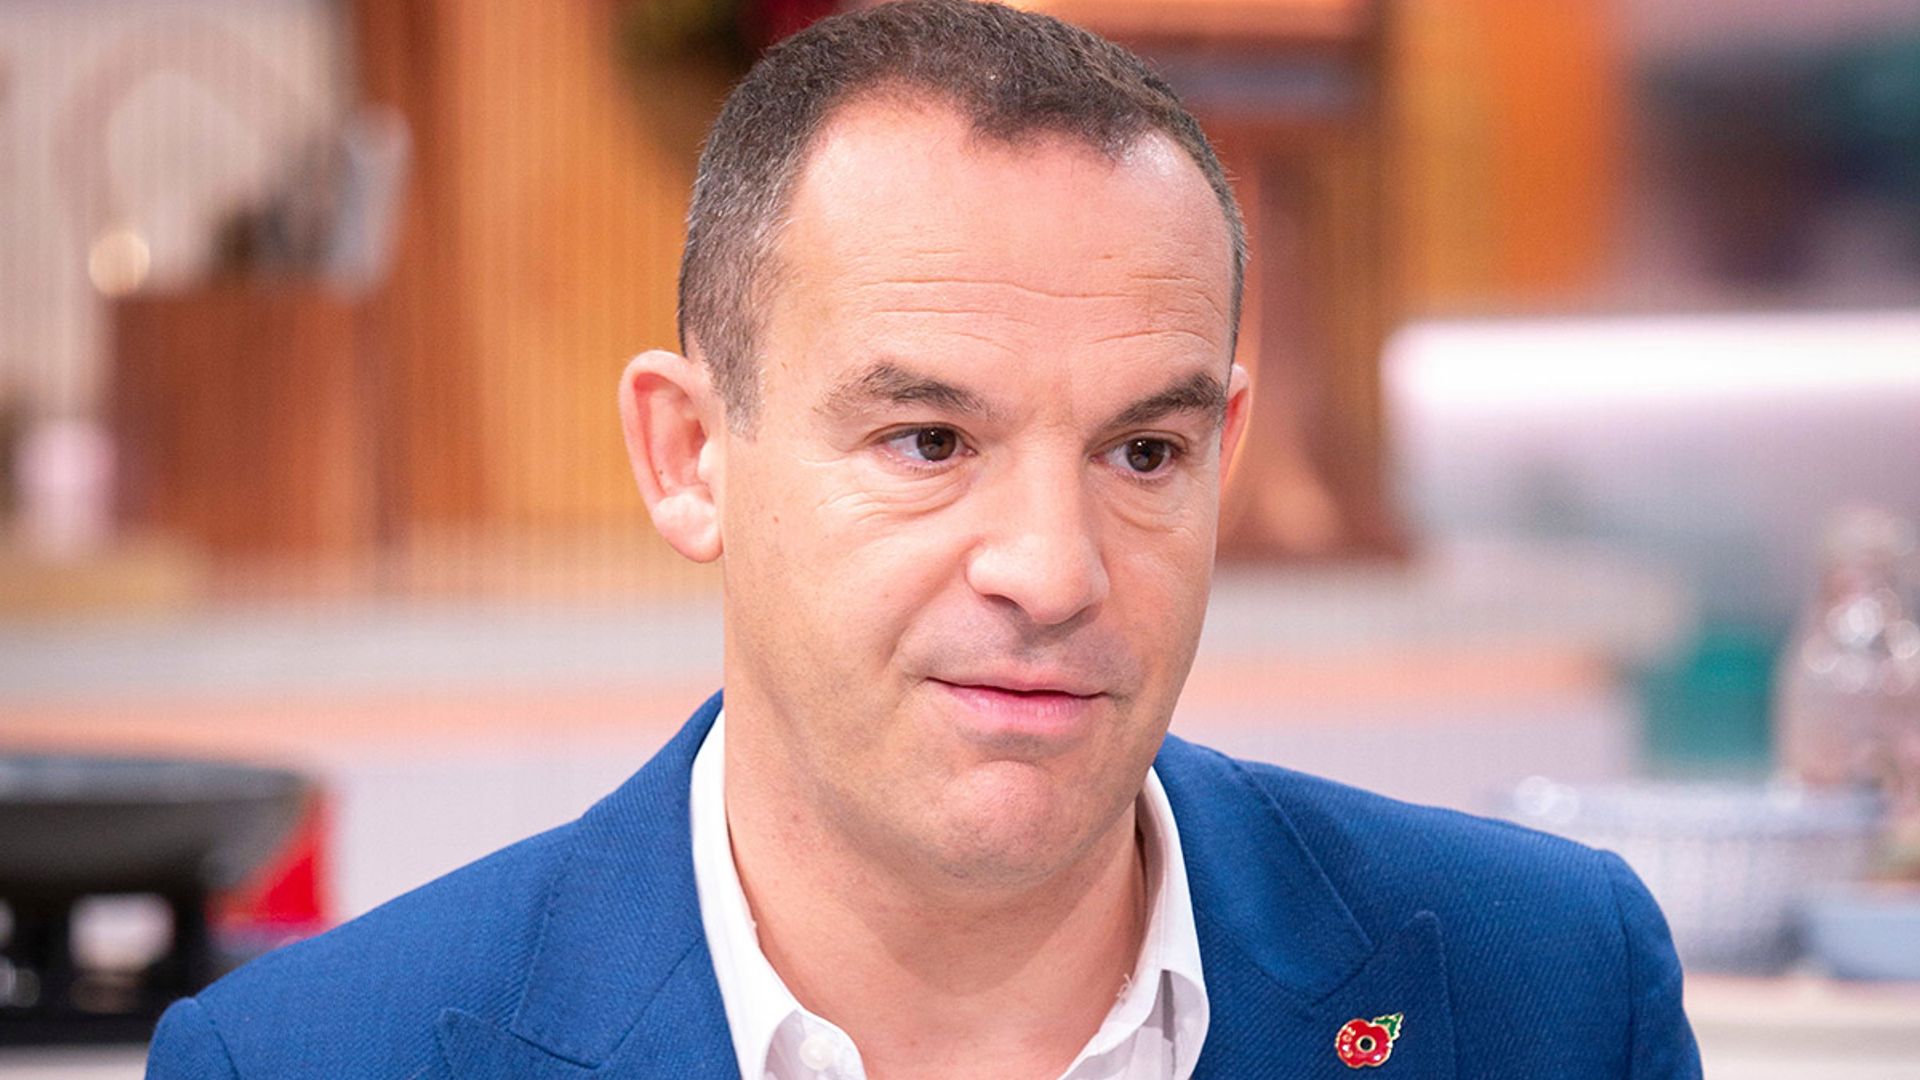 Martin Lewis reveals his wife has been robbed in shocking ordeal